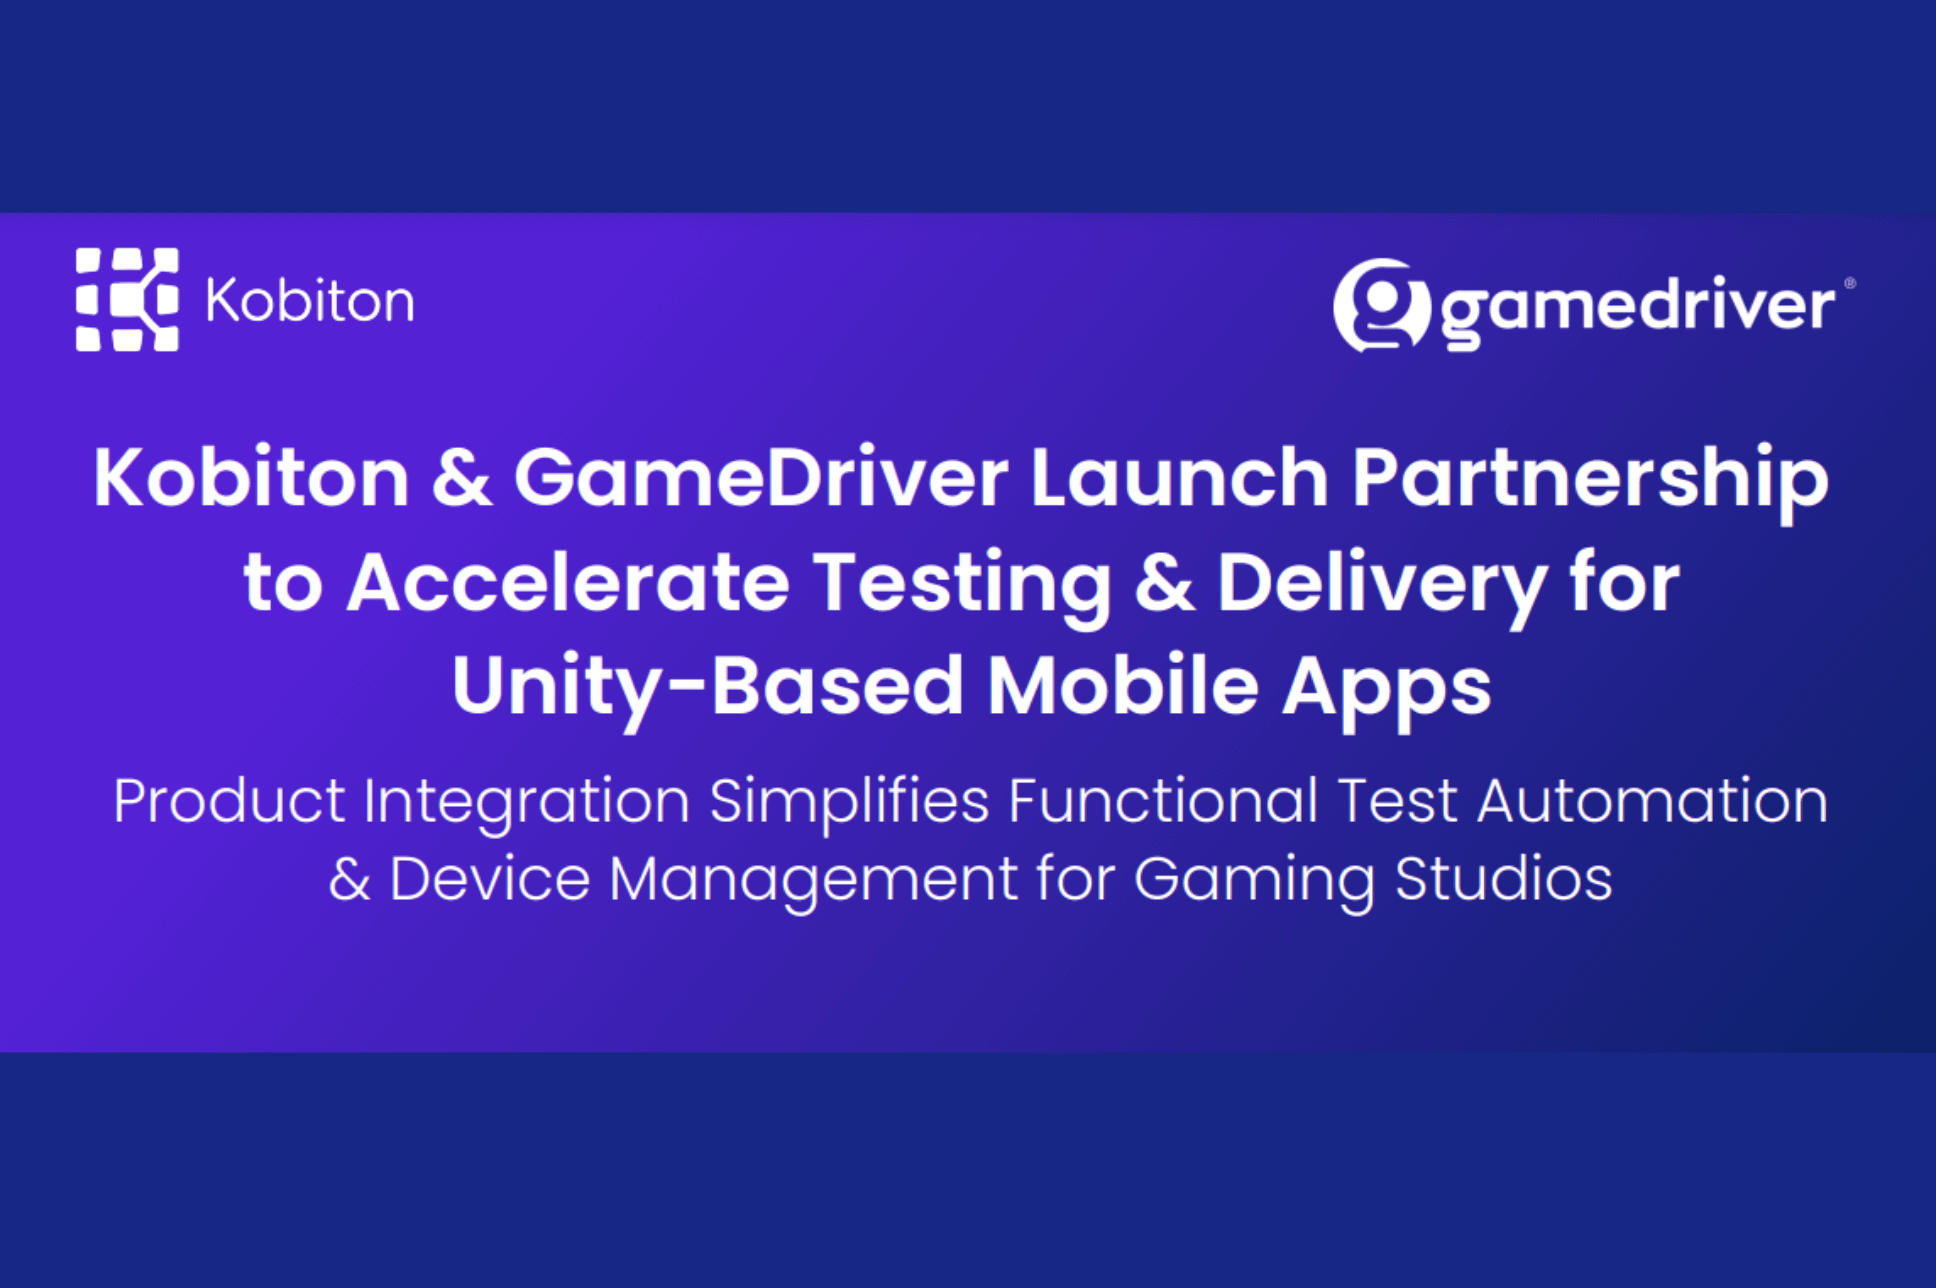 Kobiton and GameDriver launch partnership to accelerate testing and delivery for unity-based mobile apps